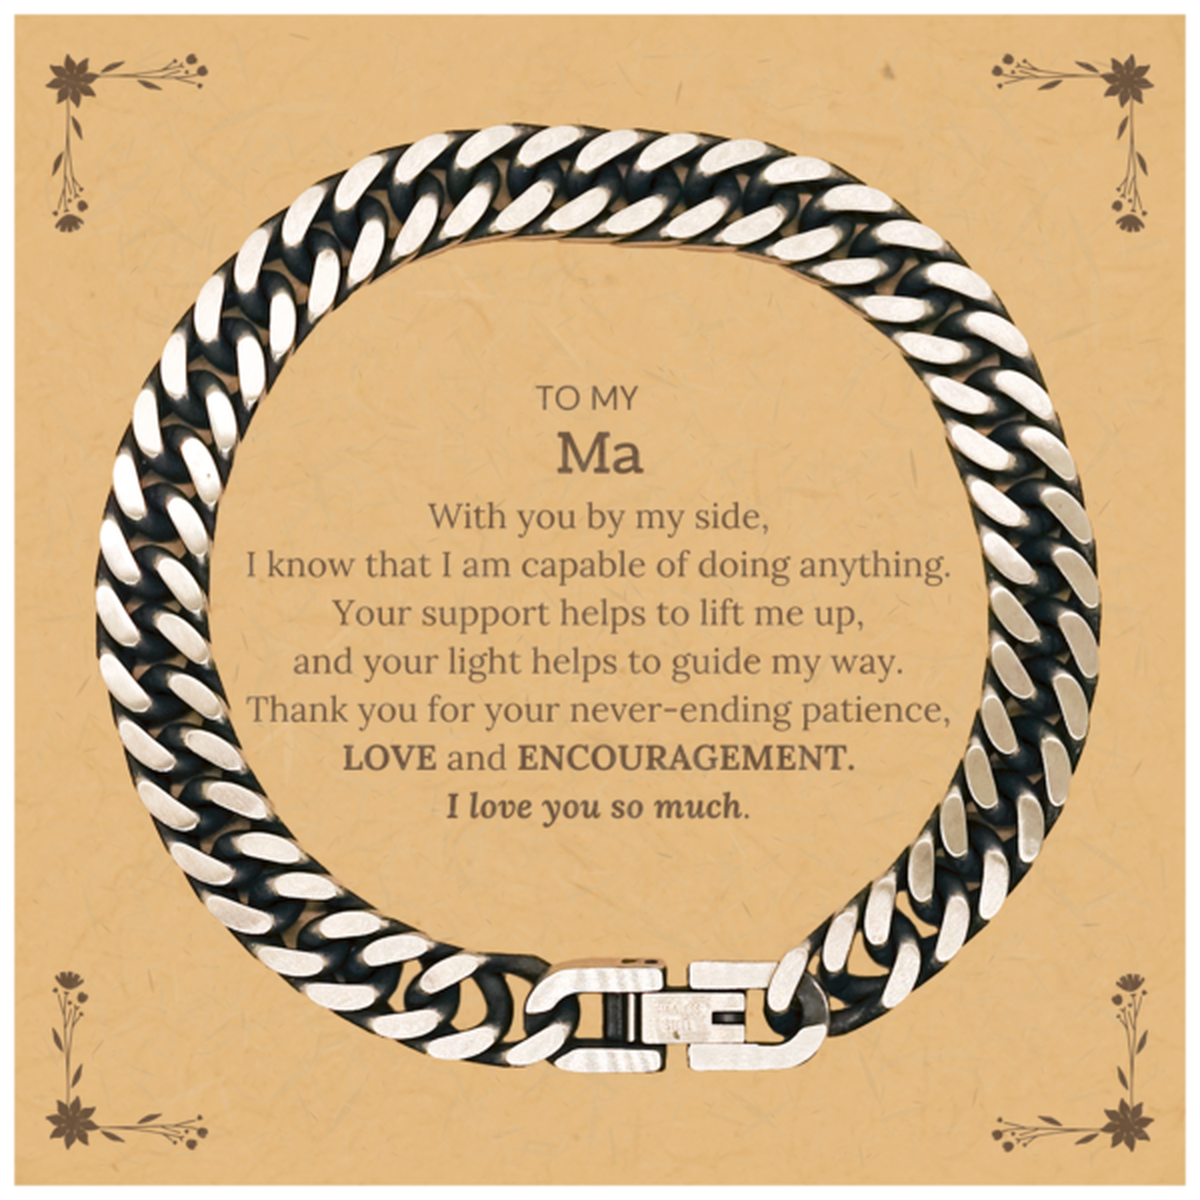 Appreciation Ma Cuban Link Chain Bracelet Gifts, To My Ma Birthday Christmas Wedding Keepsake Gifts for Ma With you by my side, I know that I am capable of doing anything. I love you so much